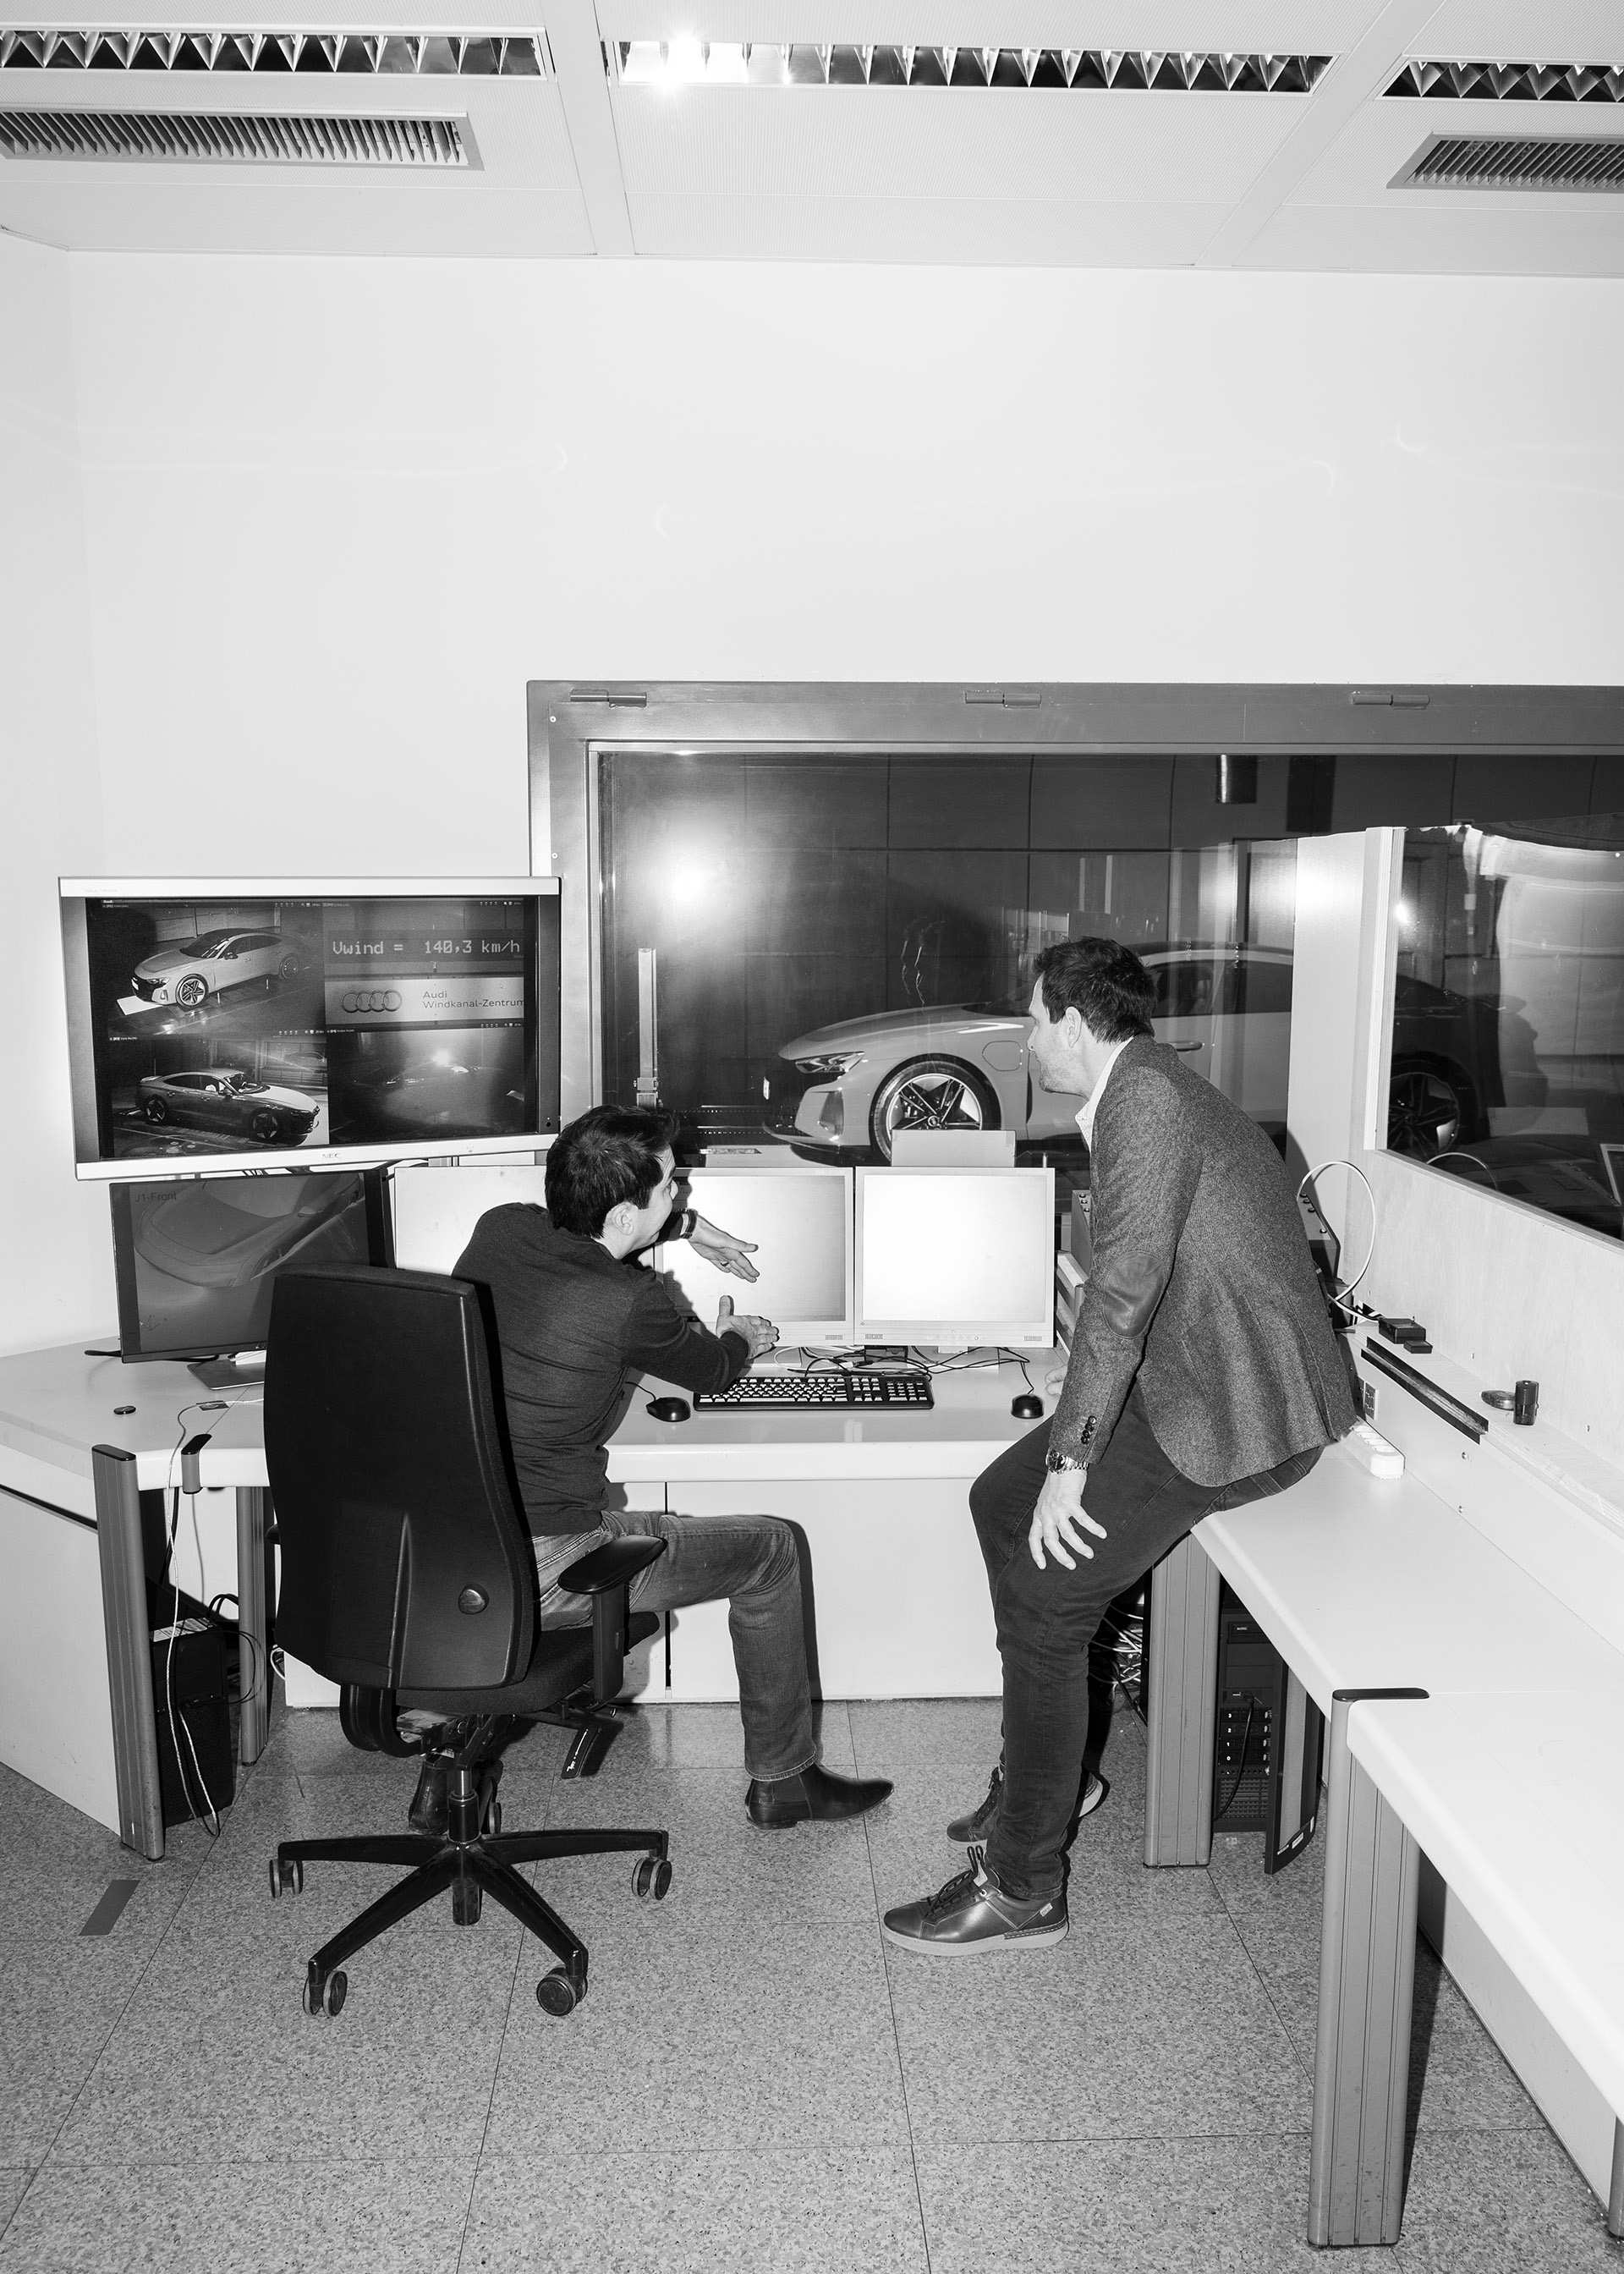 Dr. Kentaro Zens and Thomas Redenbach discuss the RS e-tron GT in front of a computer in the observation room at the Audi aerodynamics testing facility.